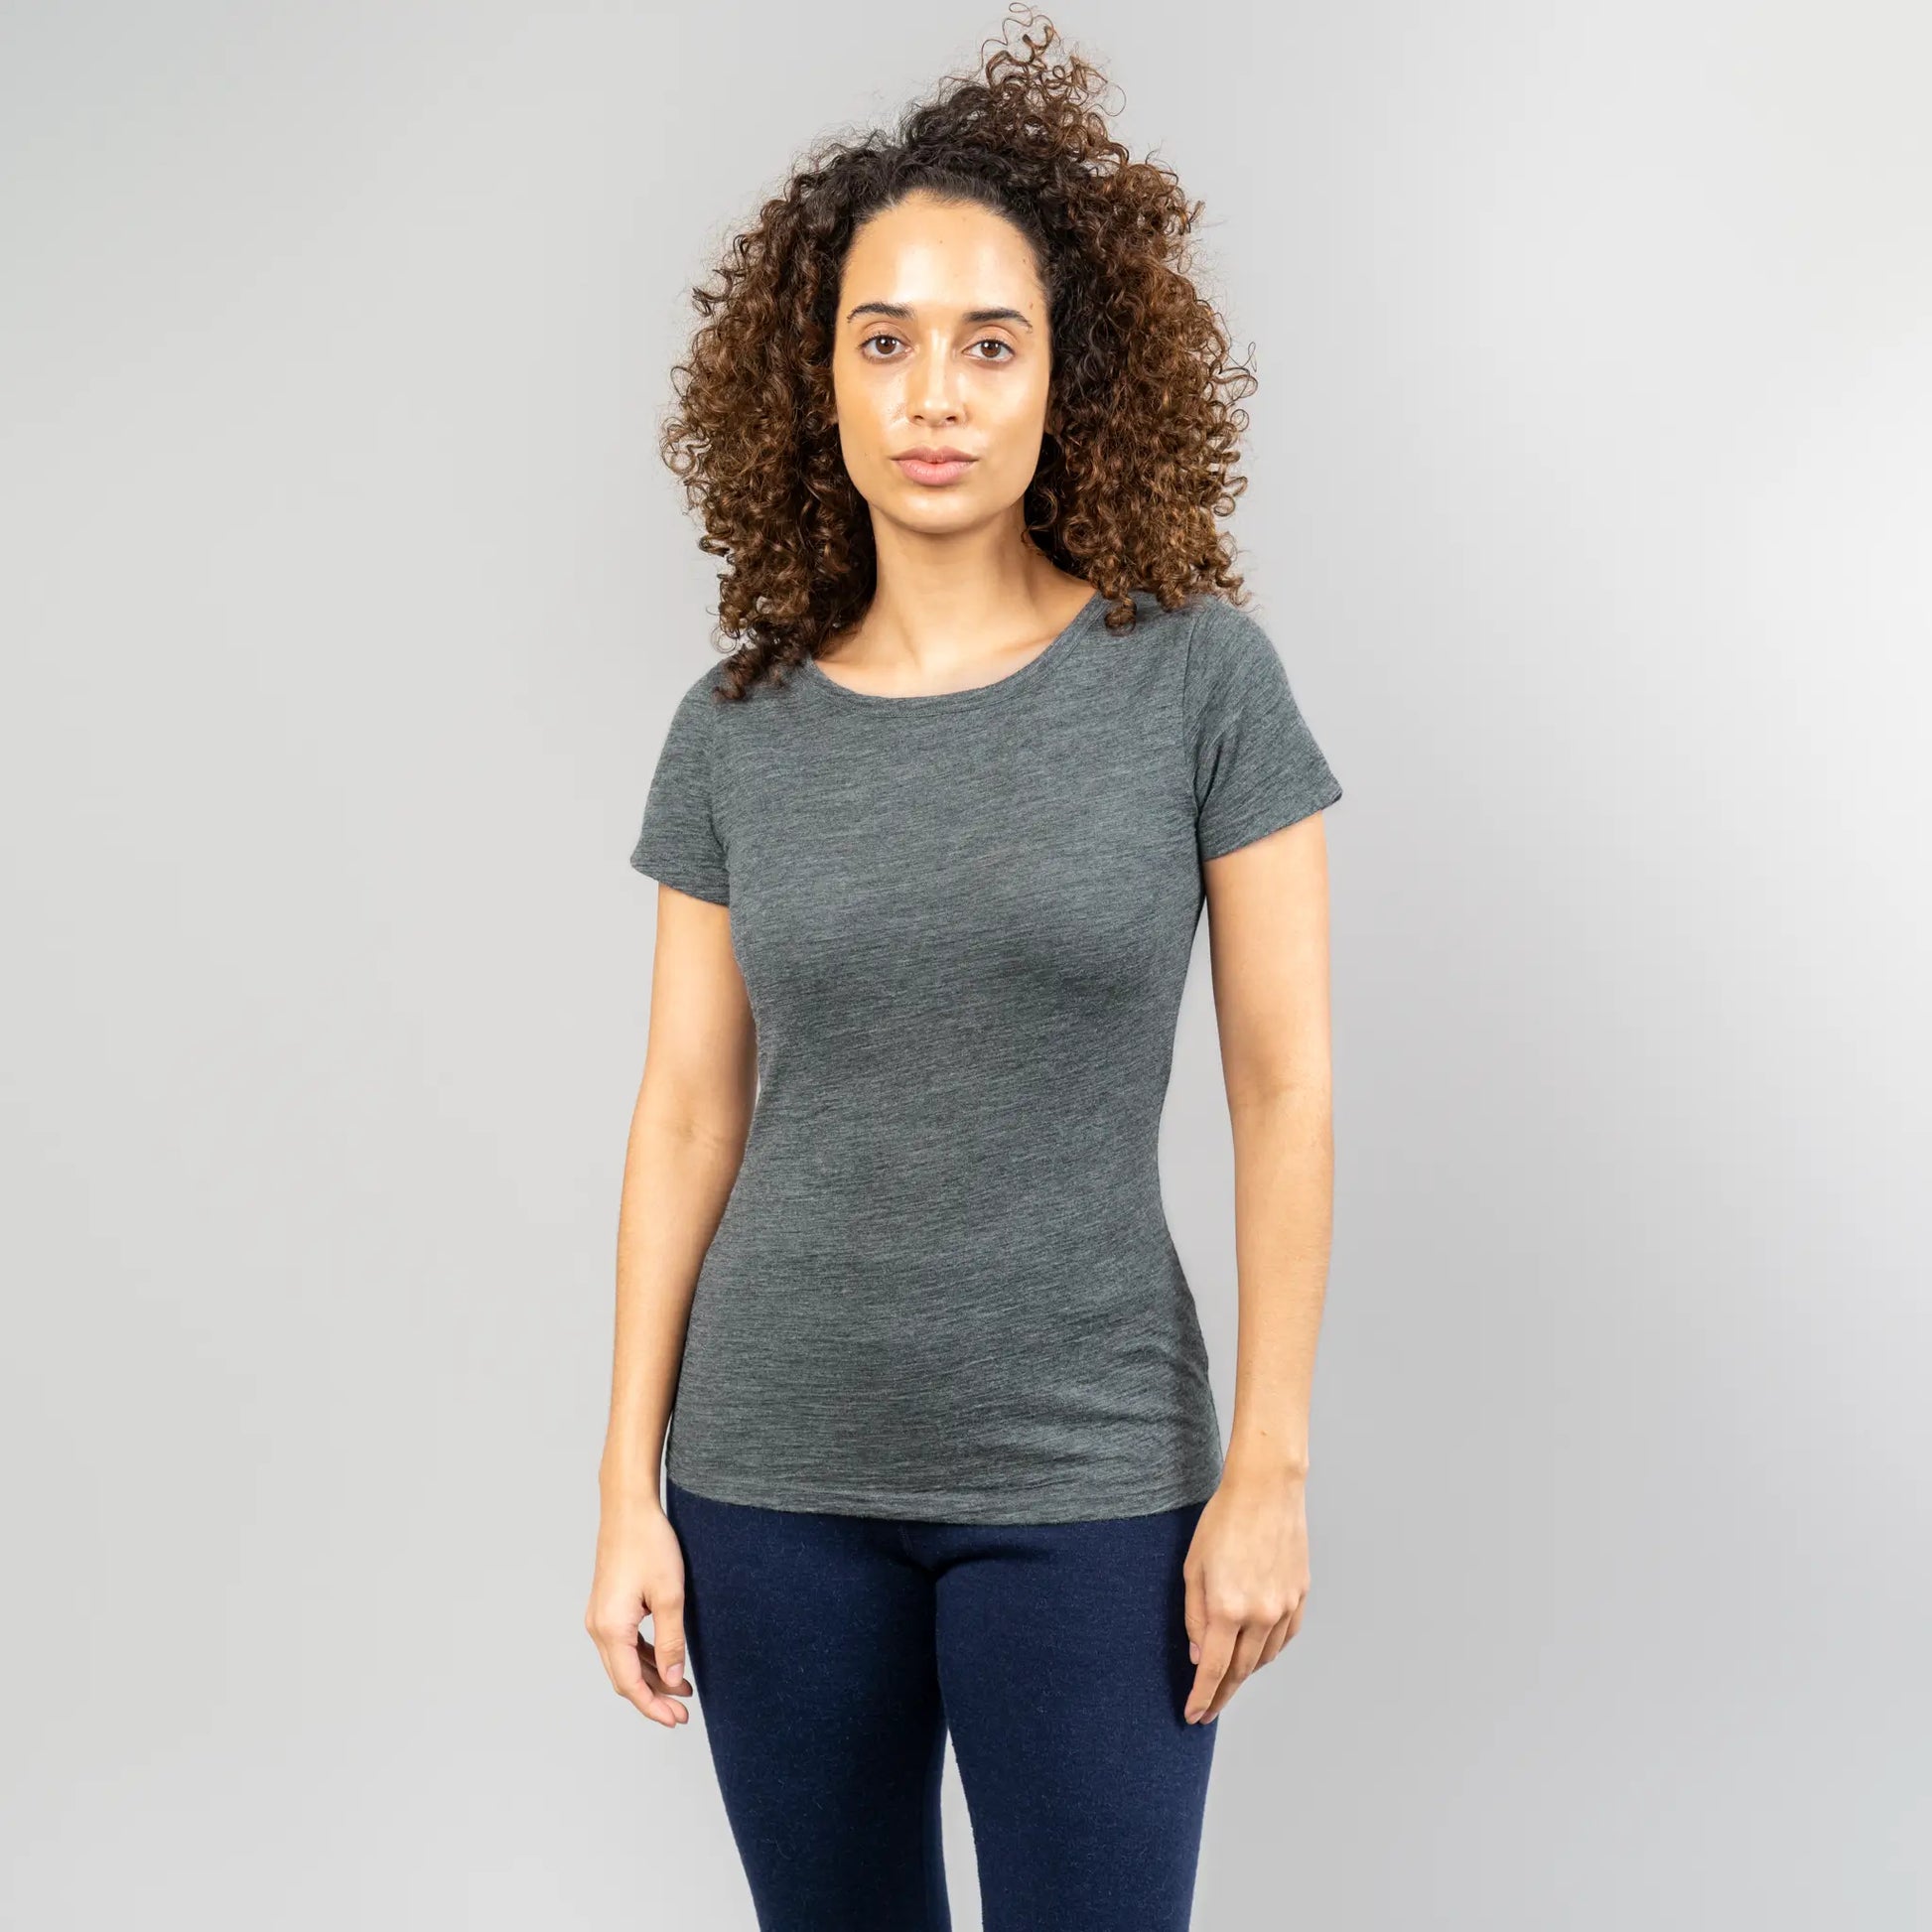 womens sweat wicking tshirt crew neck color gray